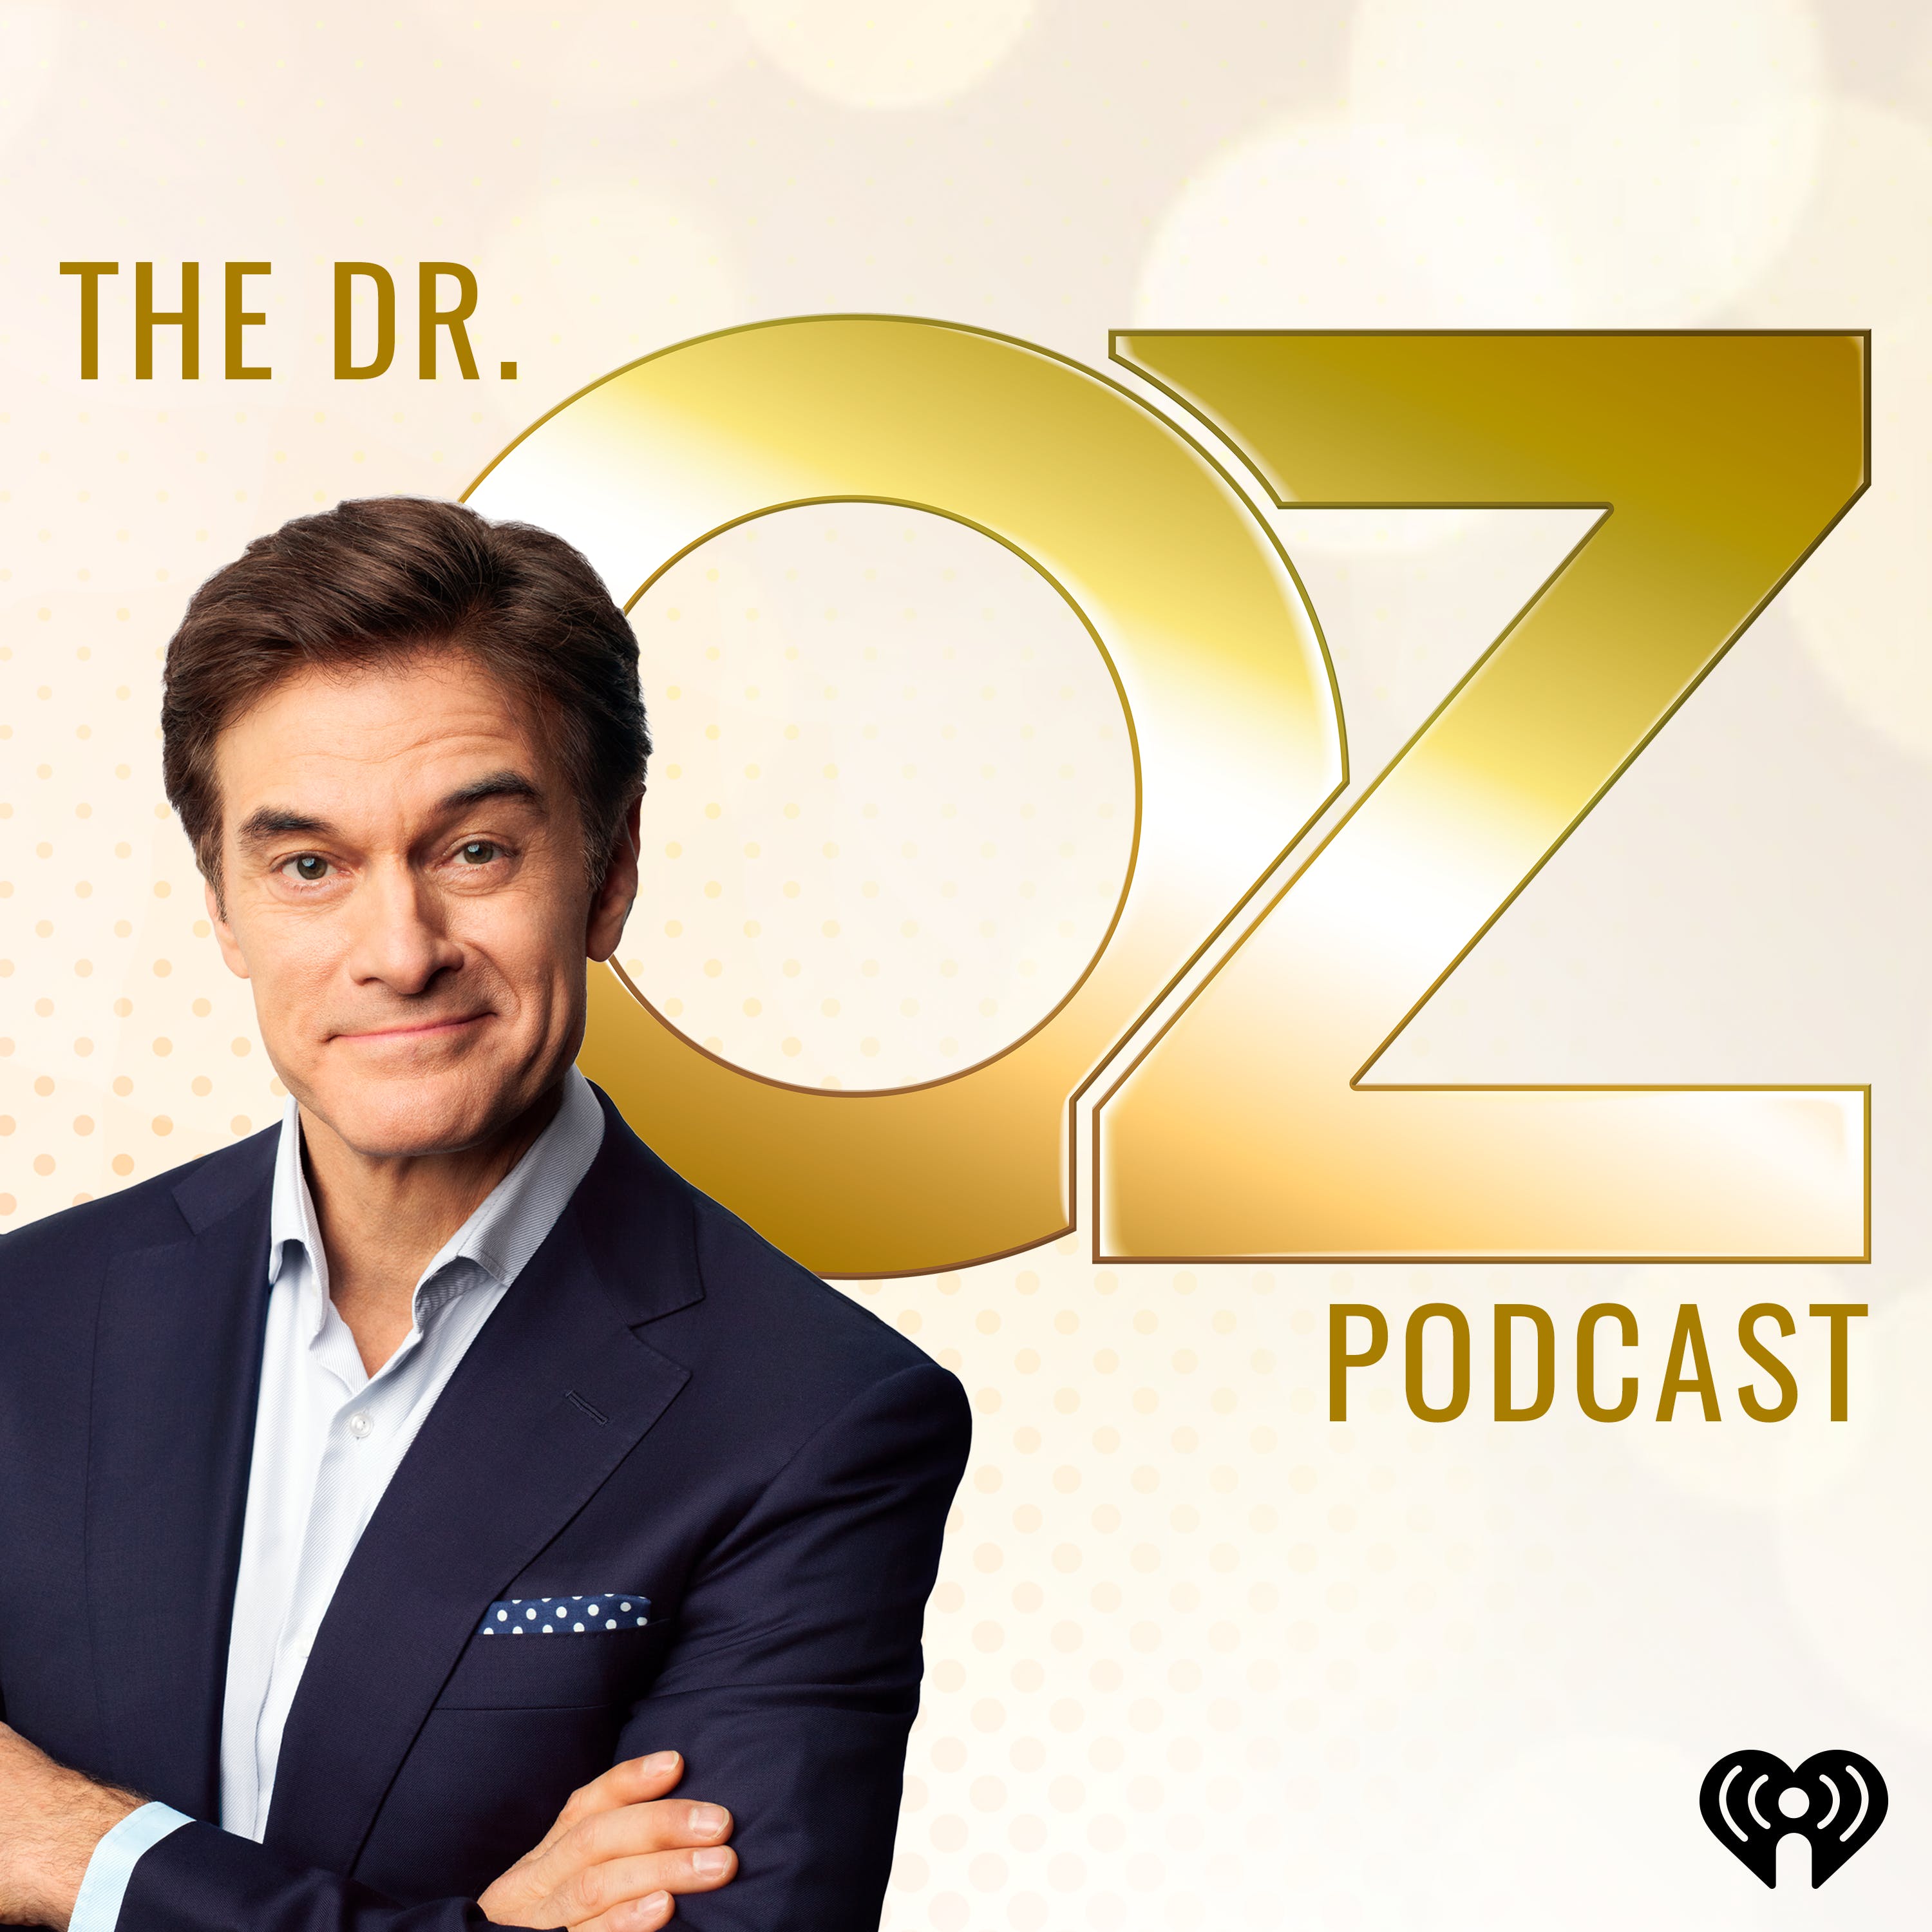 Dr. Dean Ornish on How to "Undo" Damage to Your Health